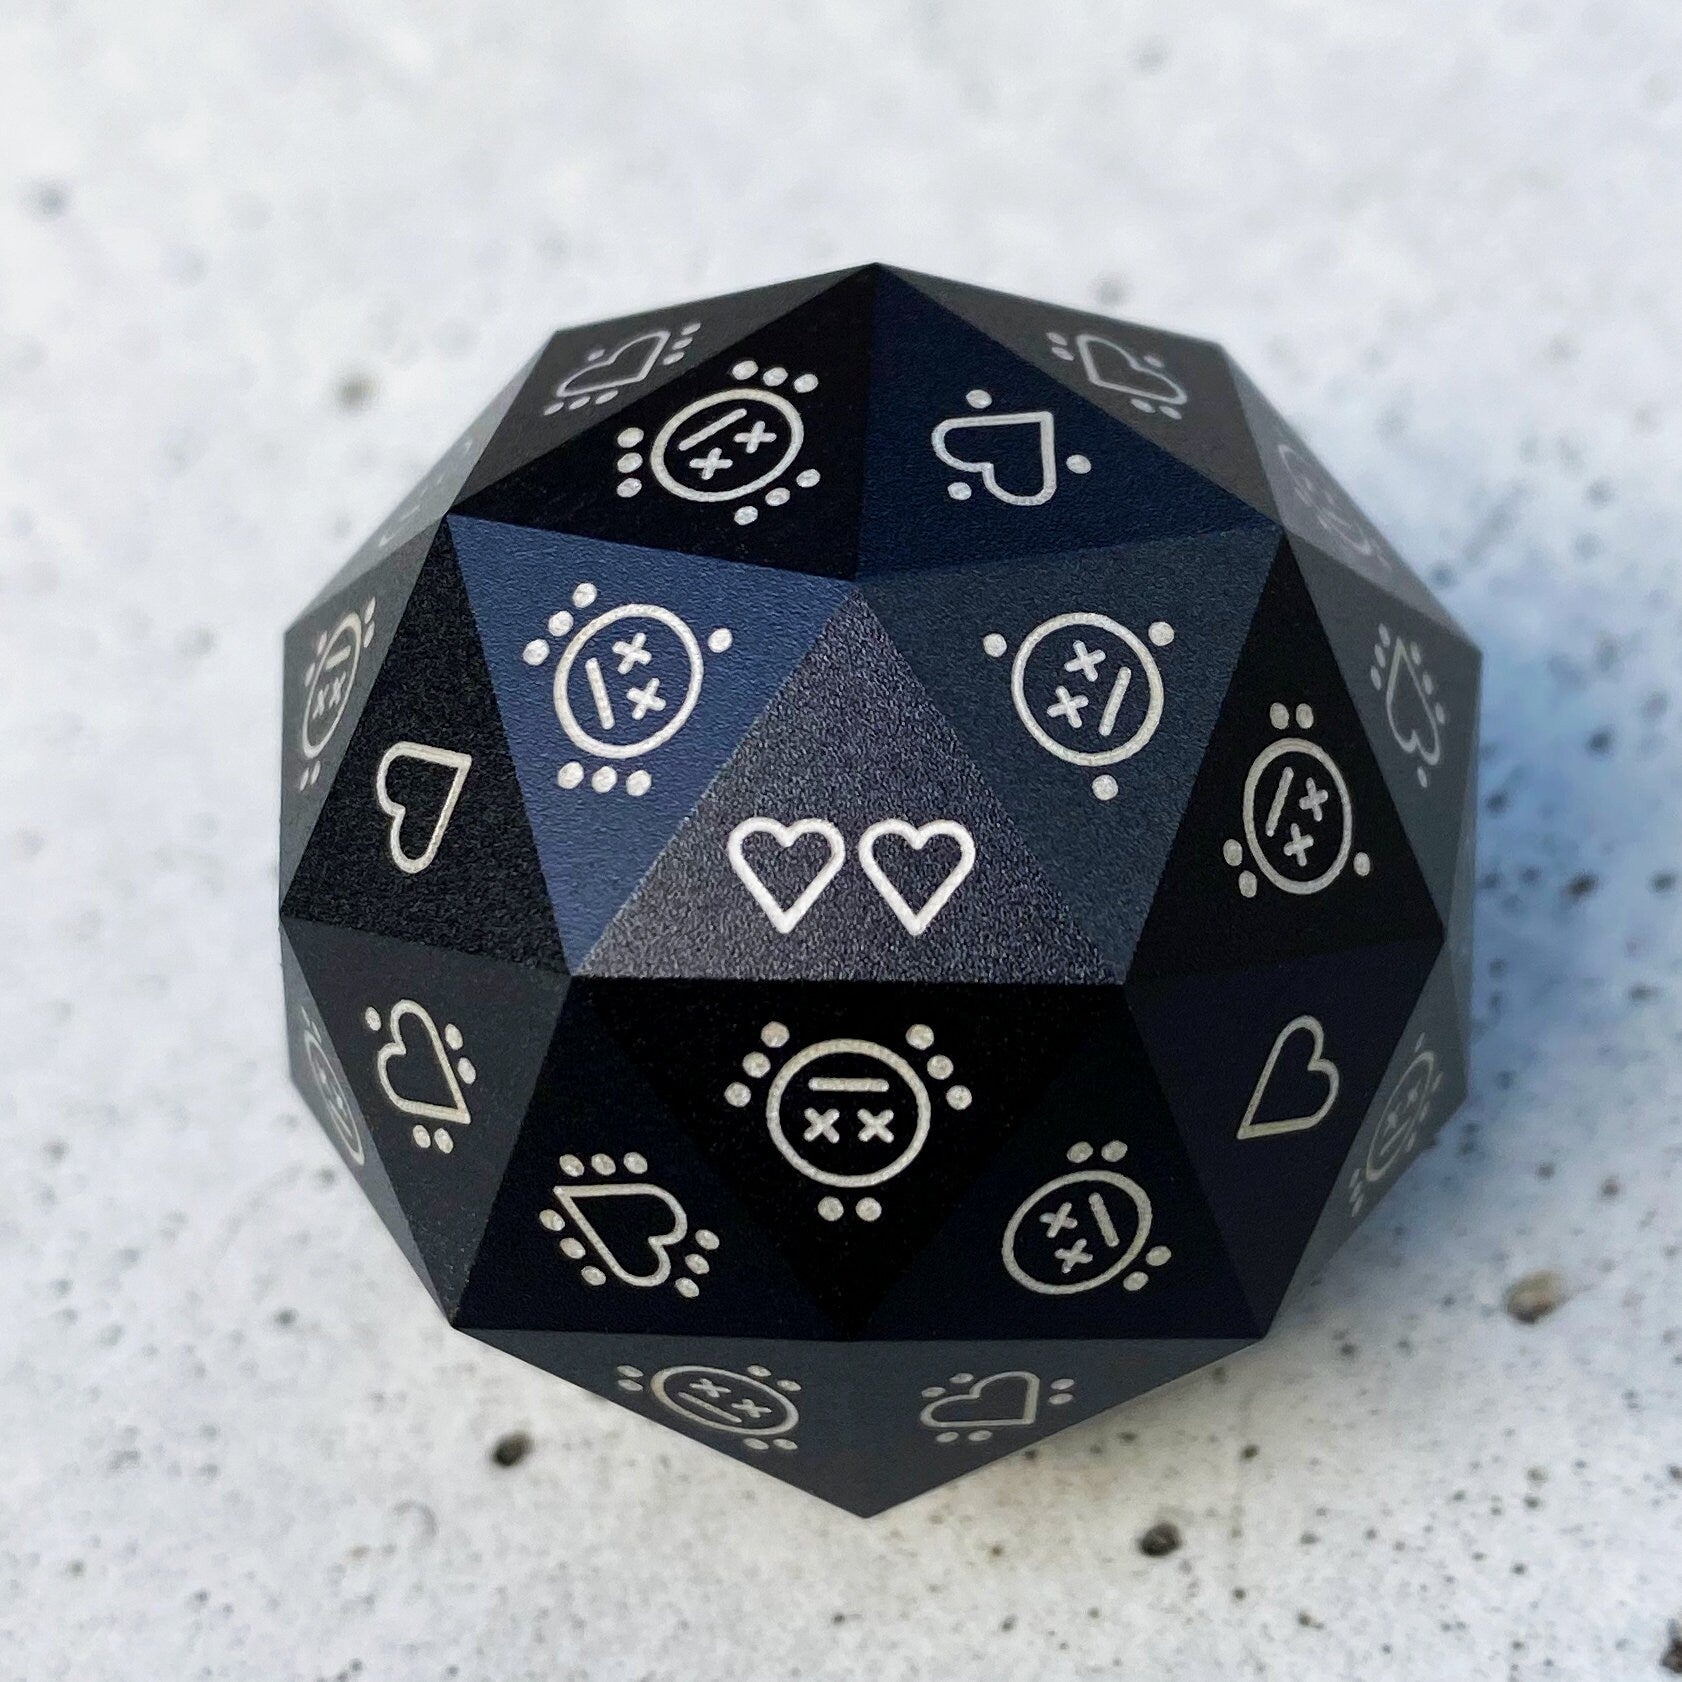 Life or Death d20